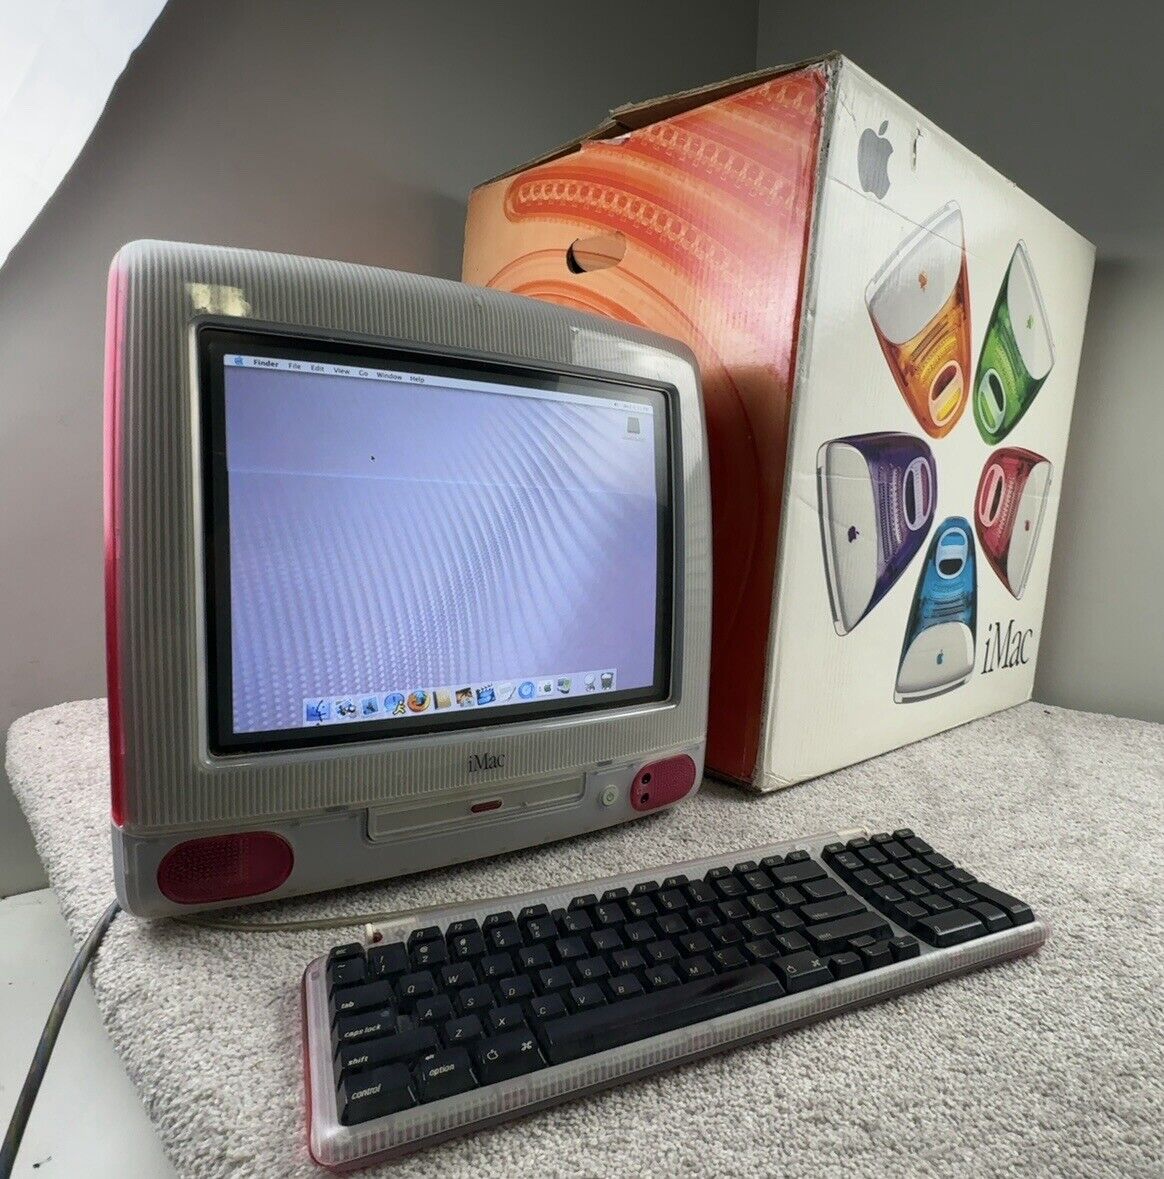 Apple iMac G3 Clear Strawberry PC Computer IN ORIGINAL BOX with Keyboard